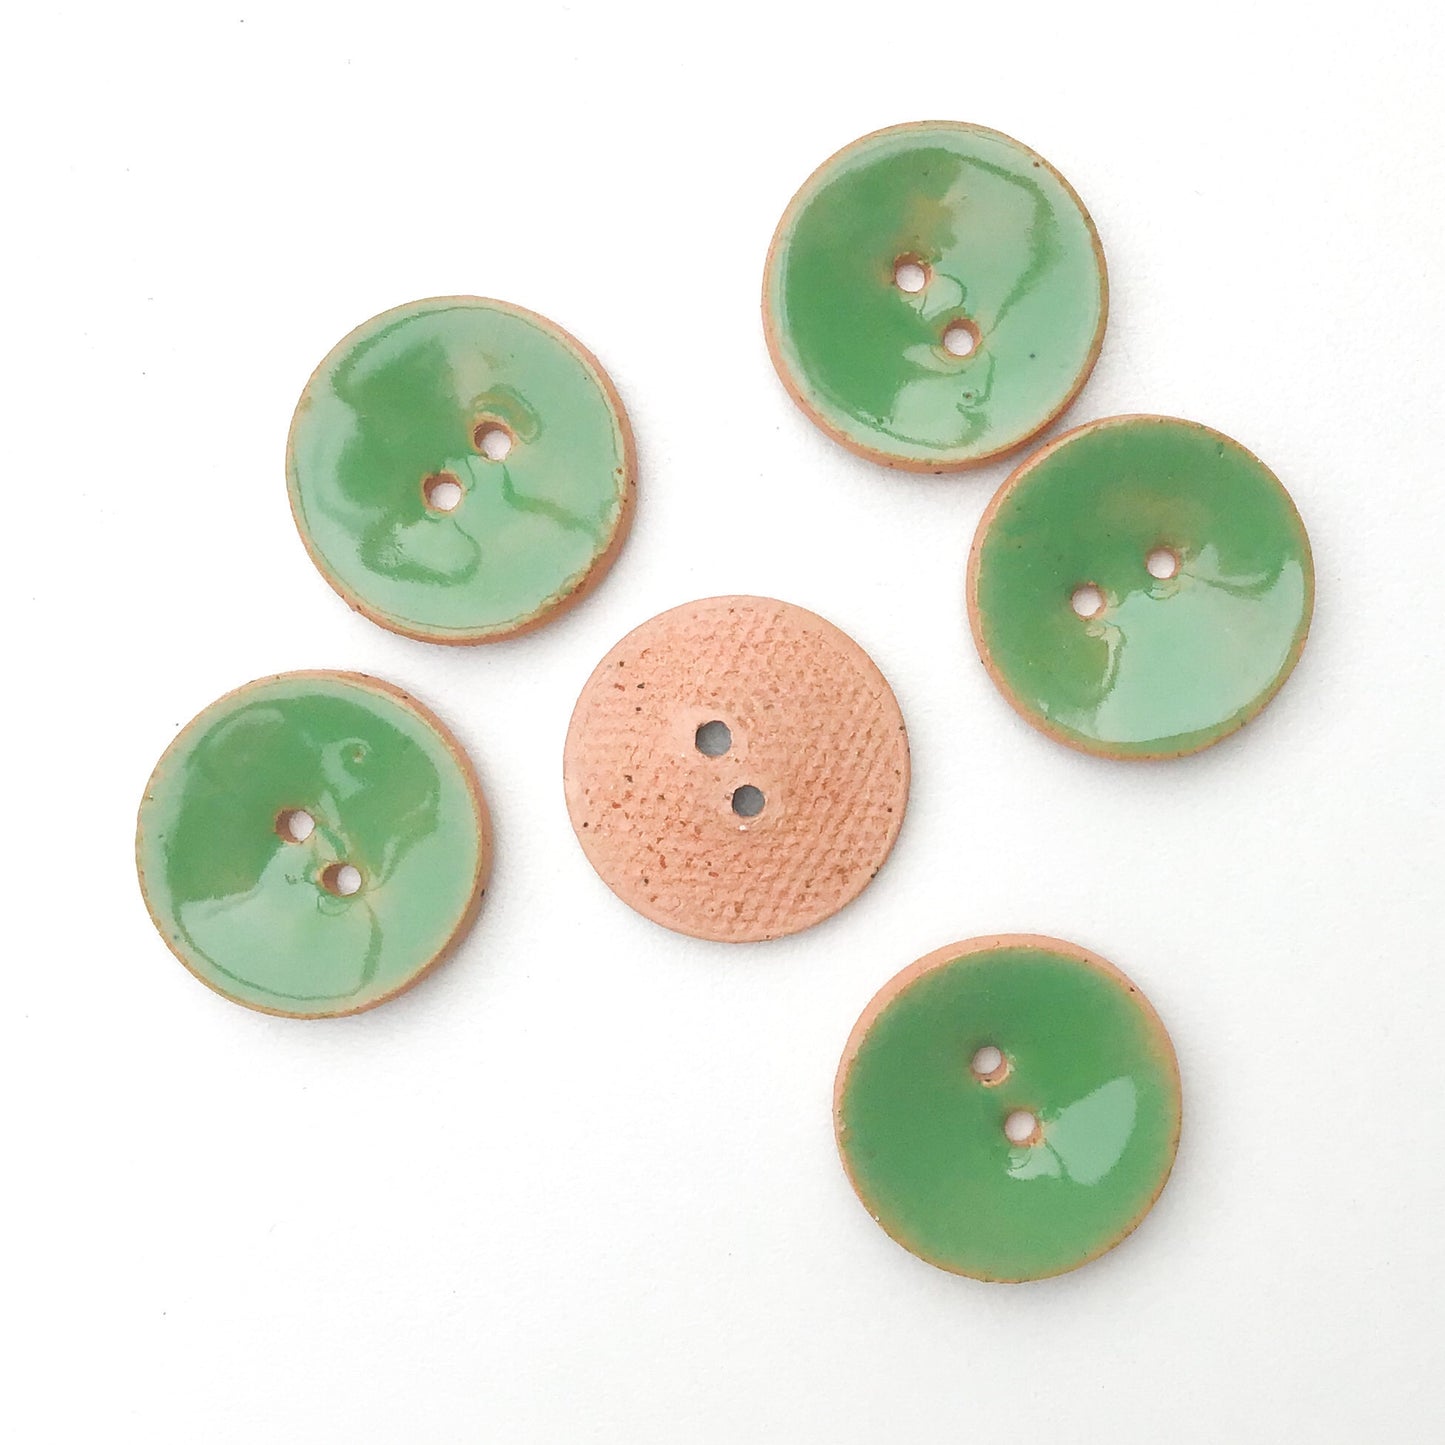 Soft Green Ceramic Buttons - Green Clay Buttons - 7/8" - 5 Pack (ws-195)